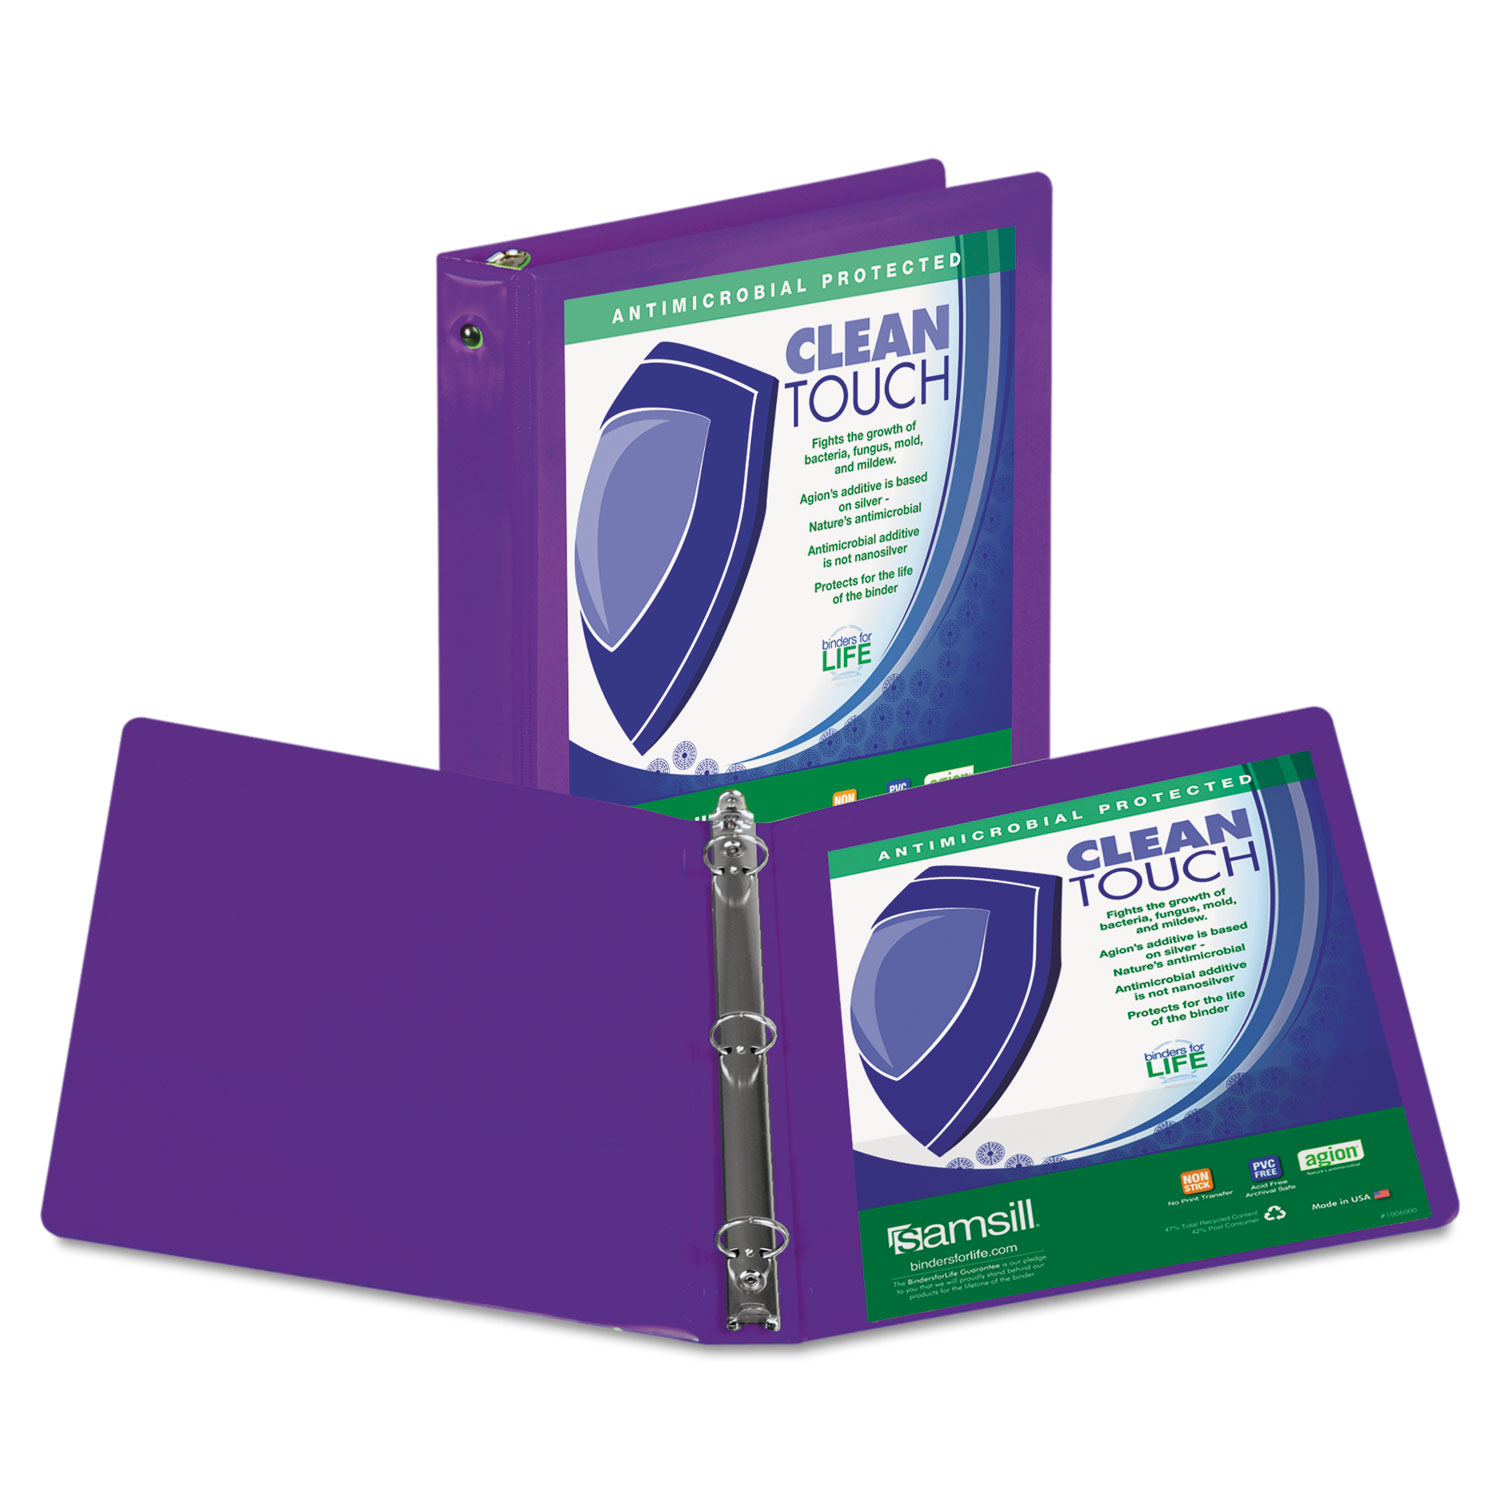 Clean Touch Round Ring View Binder, Antimicrobial, 4, Purple